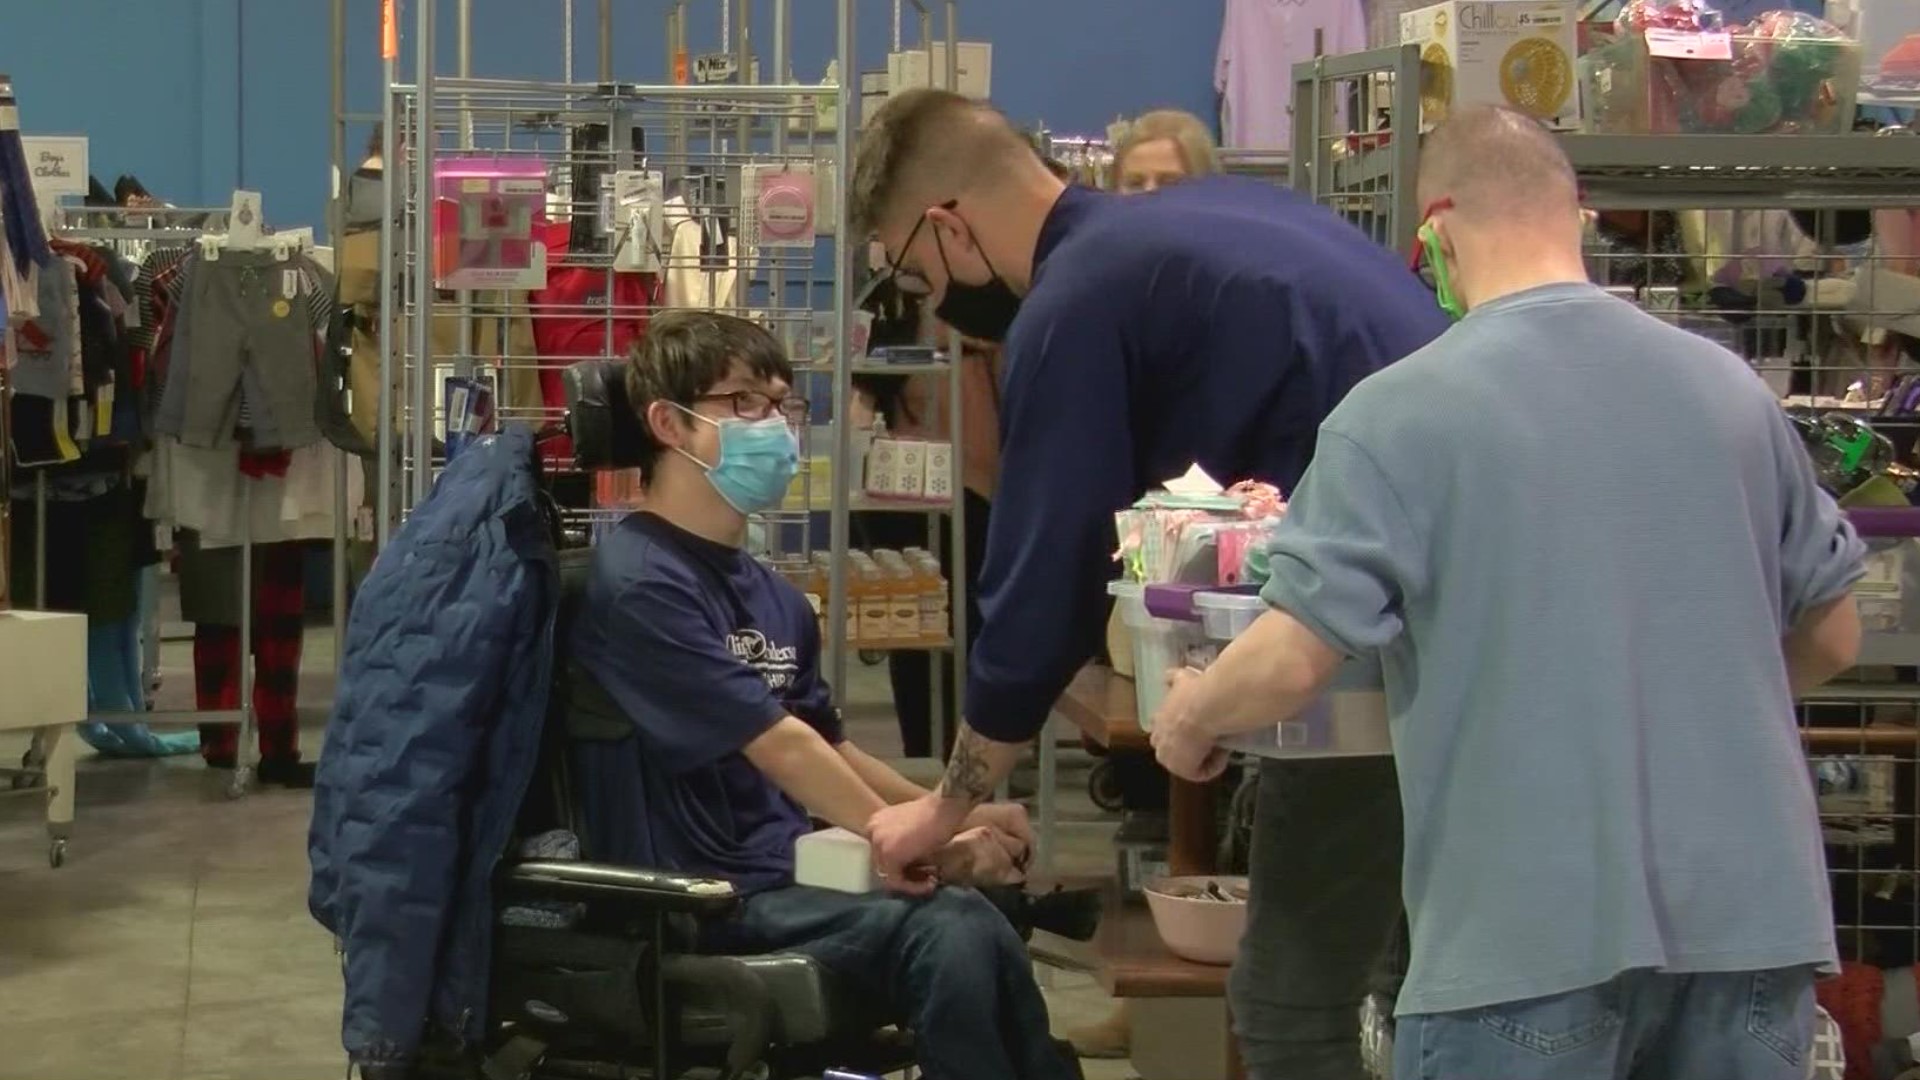 October is National Disability Employment Awareness Month. The Lucas County Board of Developmental Disabilities emphasizes some hires just need to be given a chance.